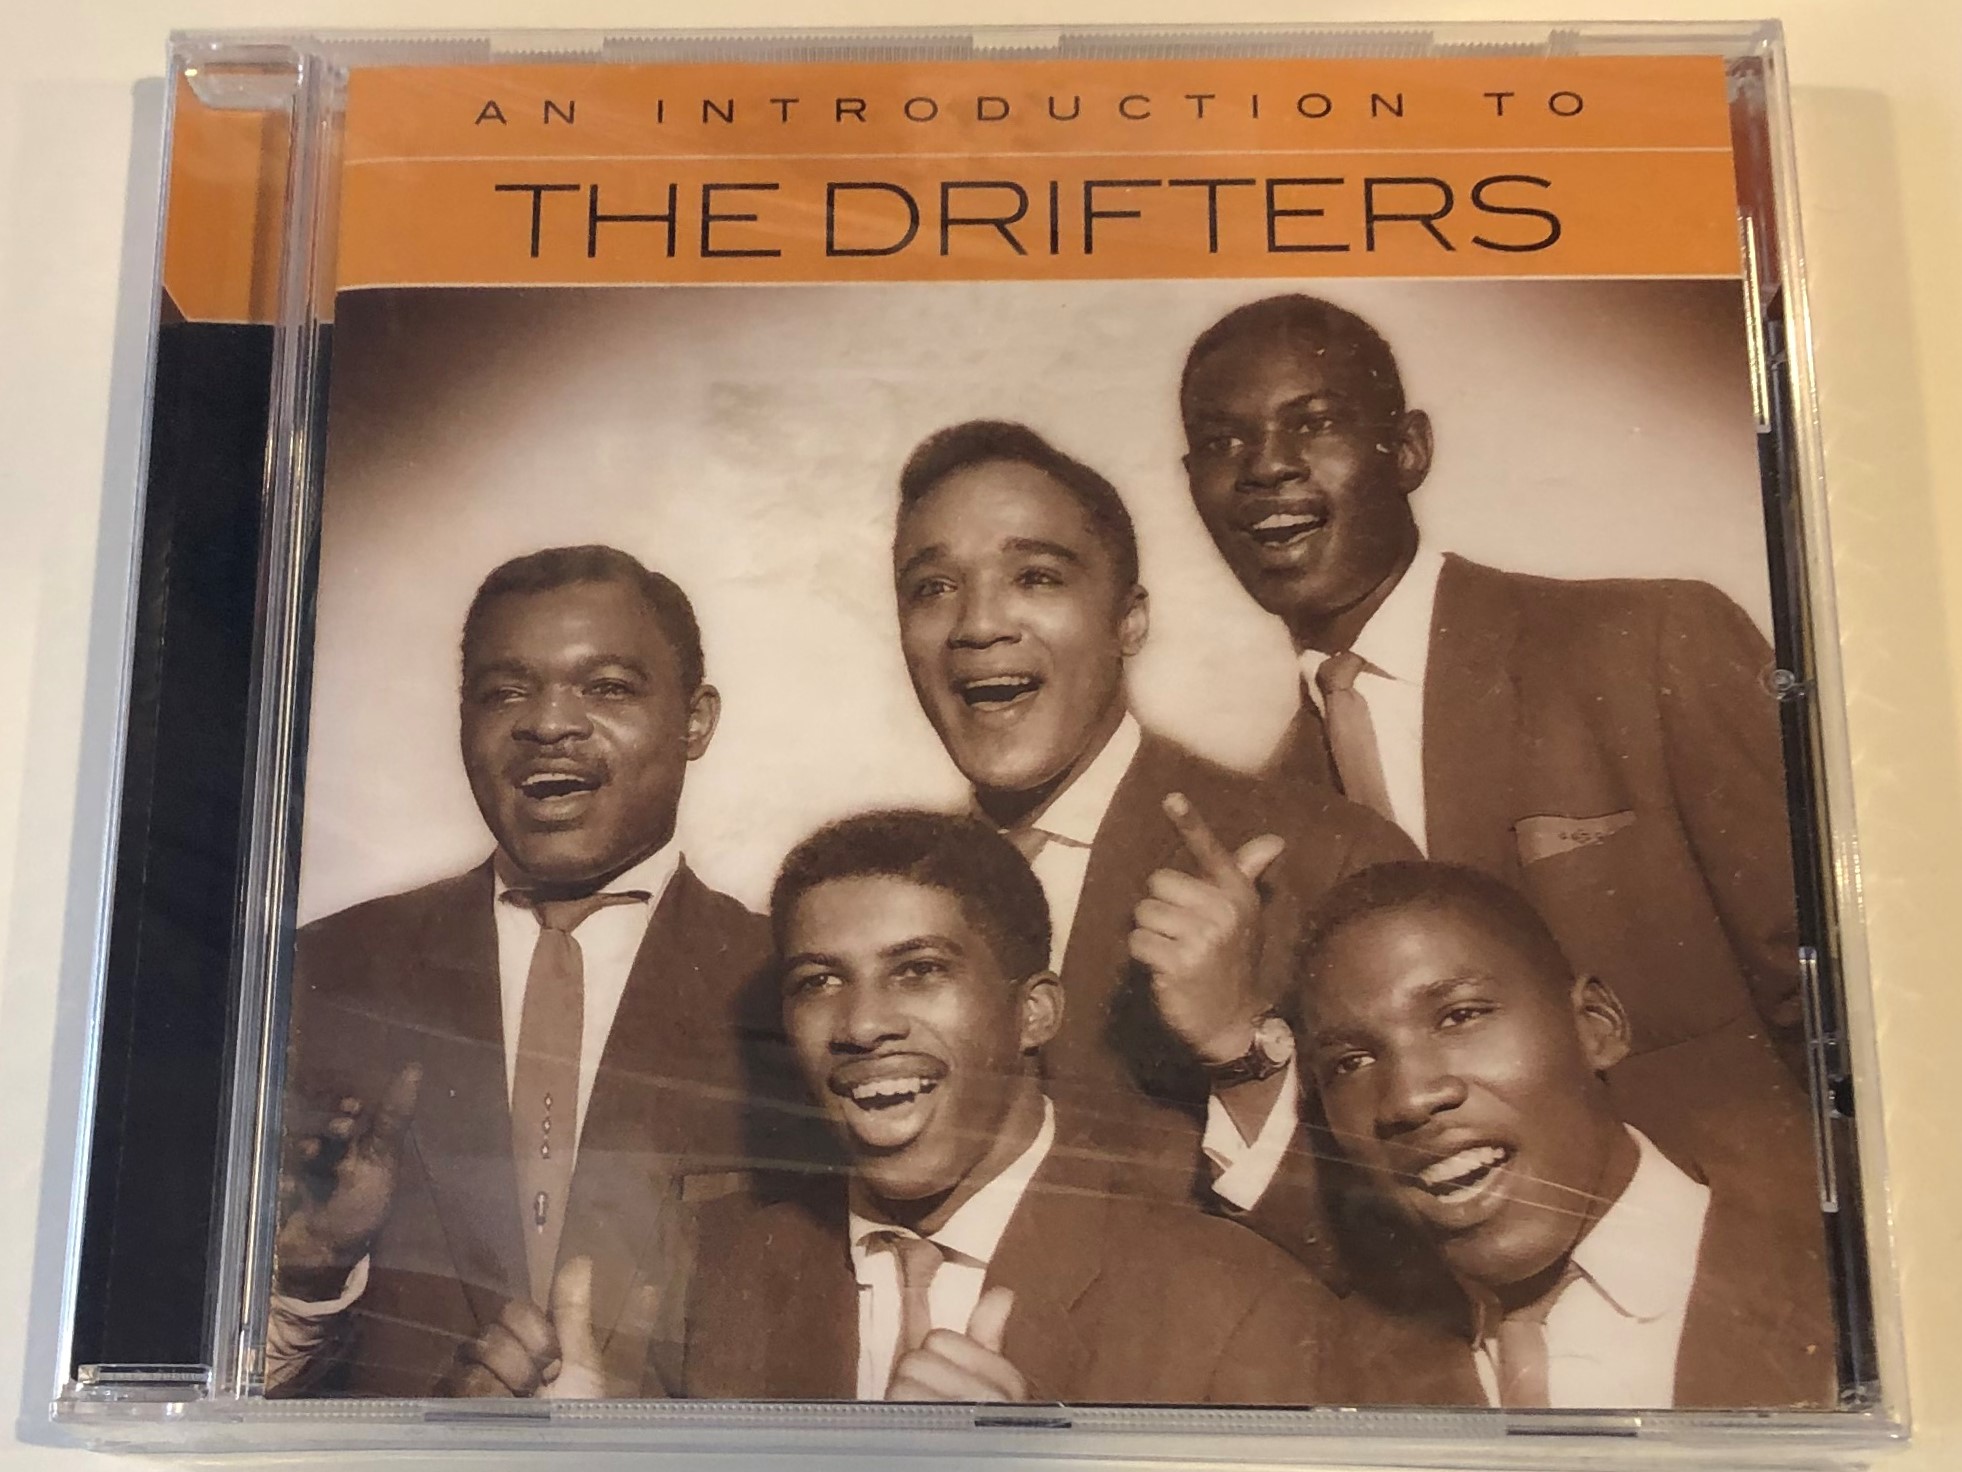 an-introduction-to-the-drifters-rhino-records-audio-cd-2017-081227938666-1-.jpg